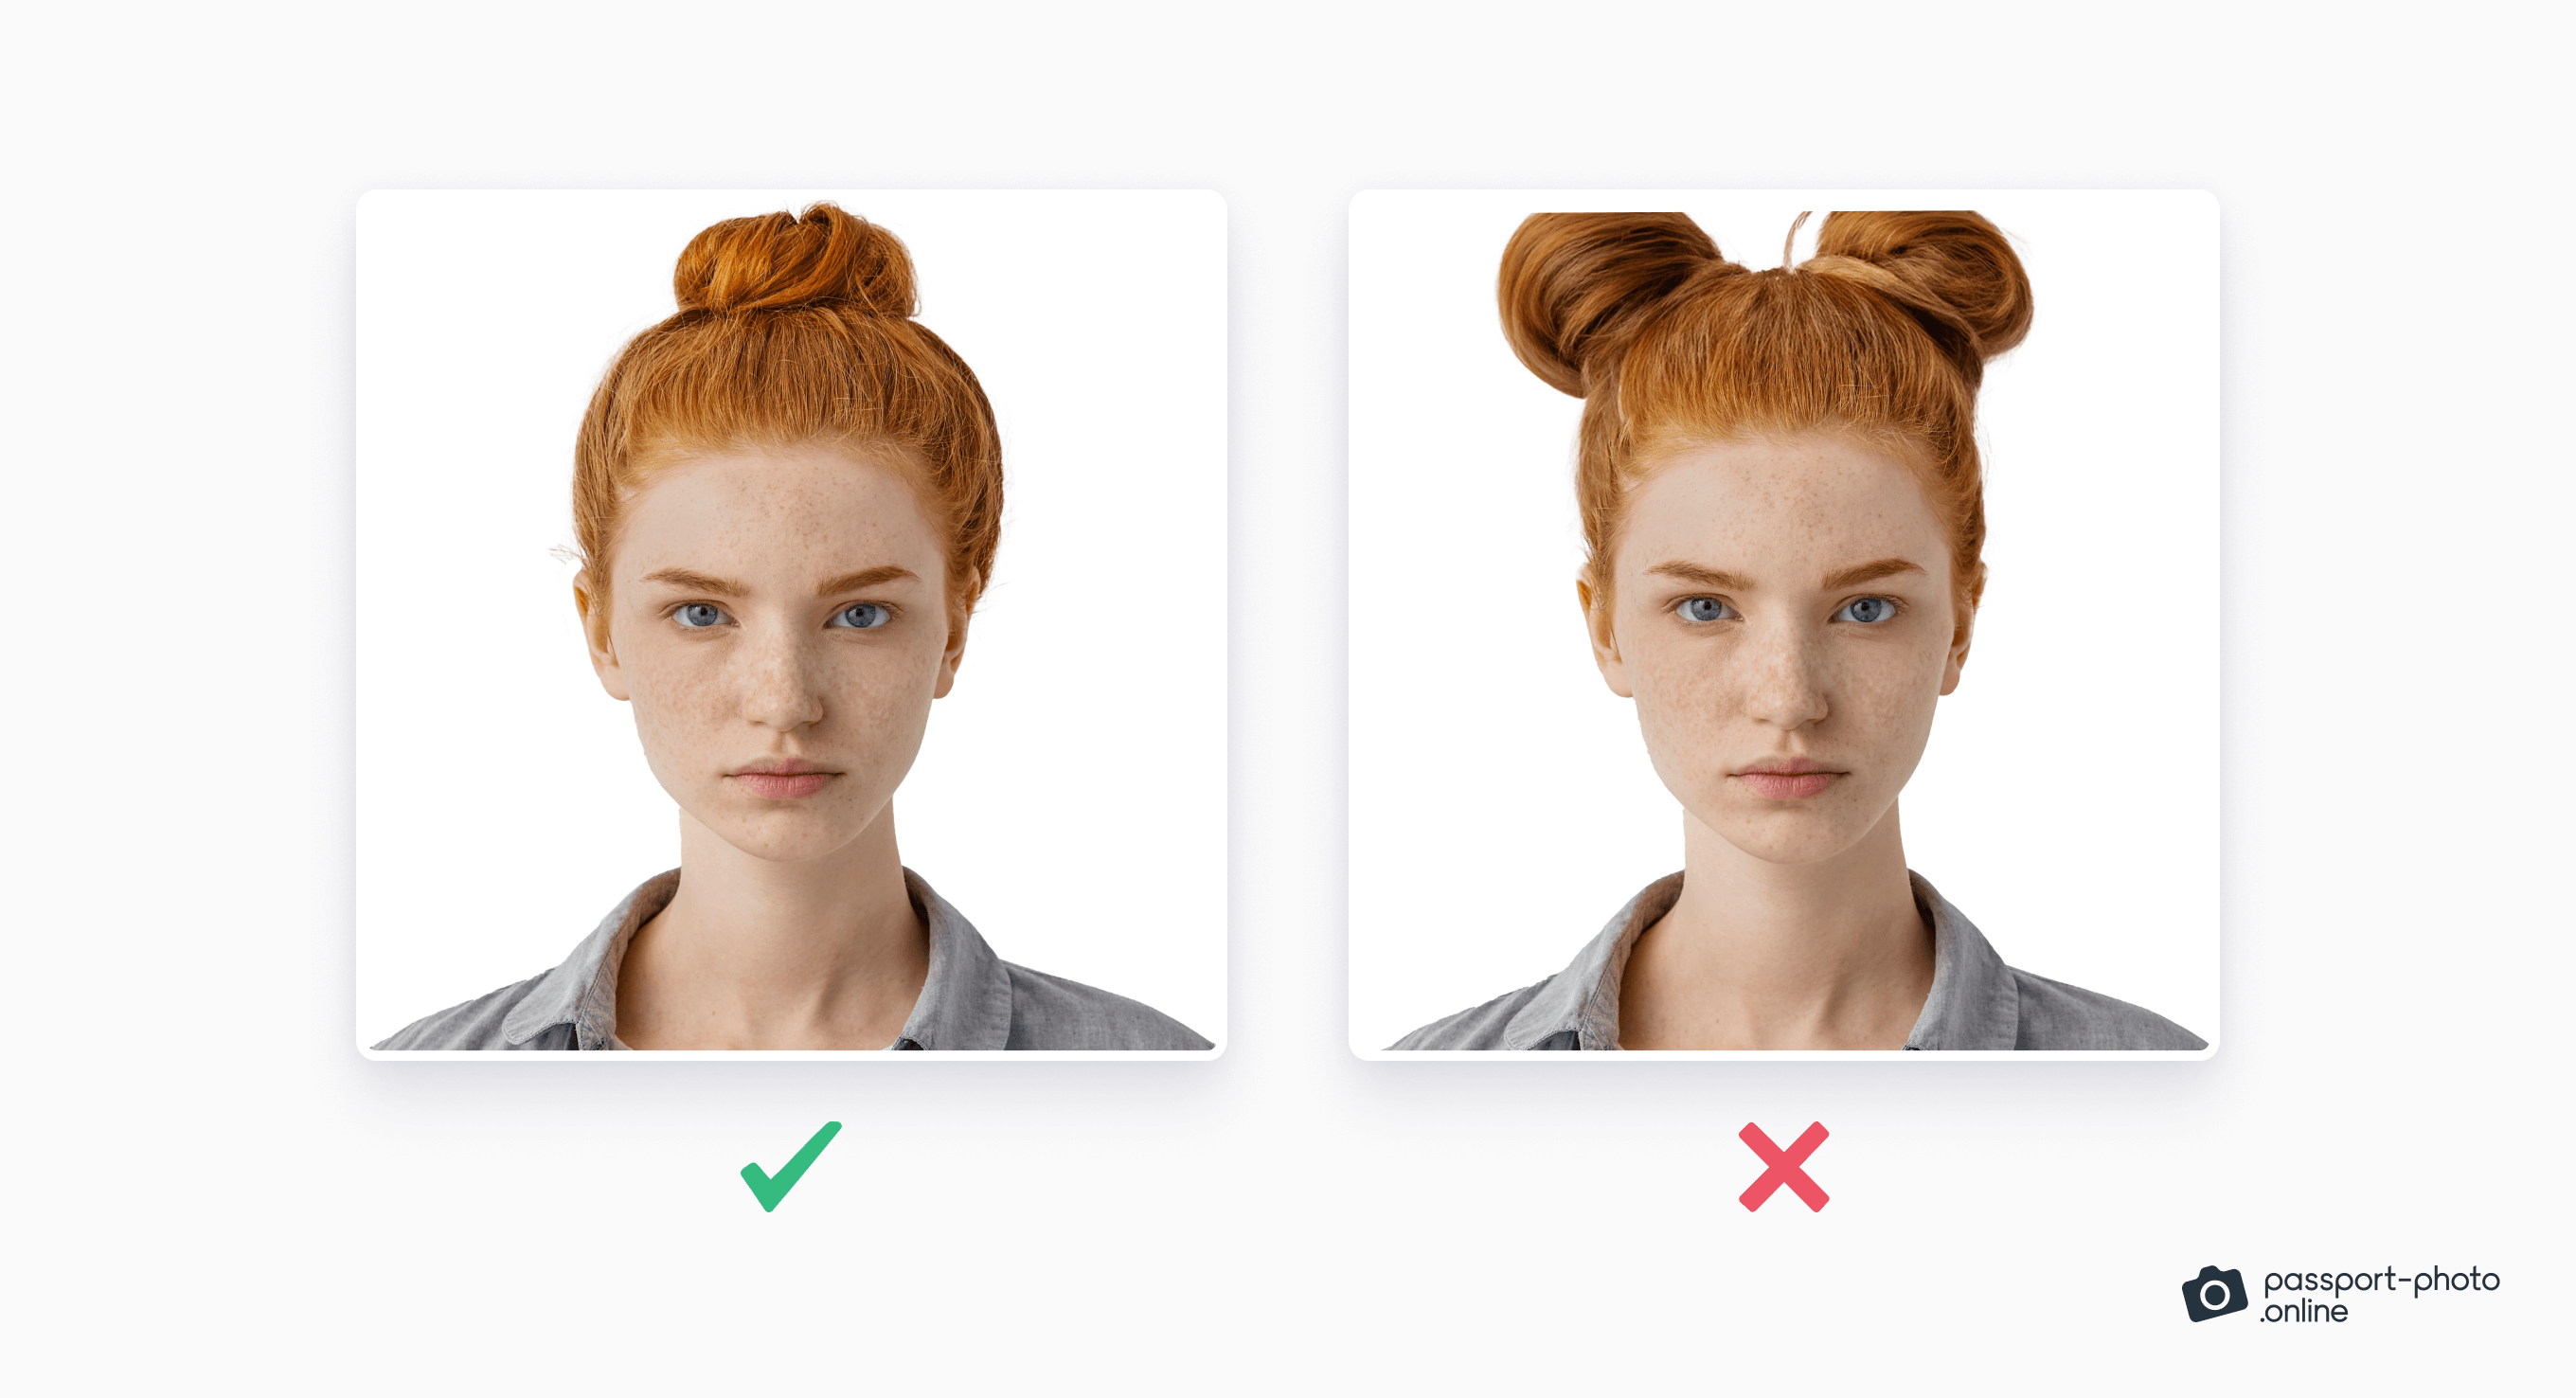 How To Look Good In ID Photos